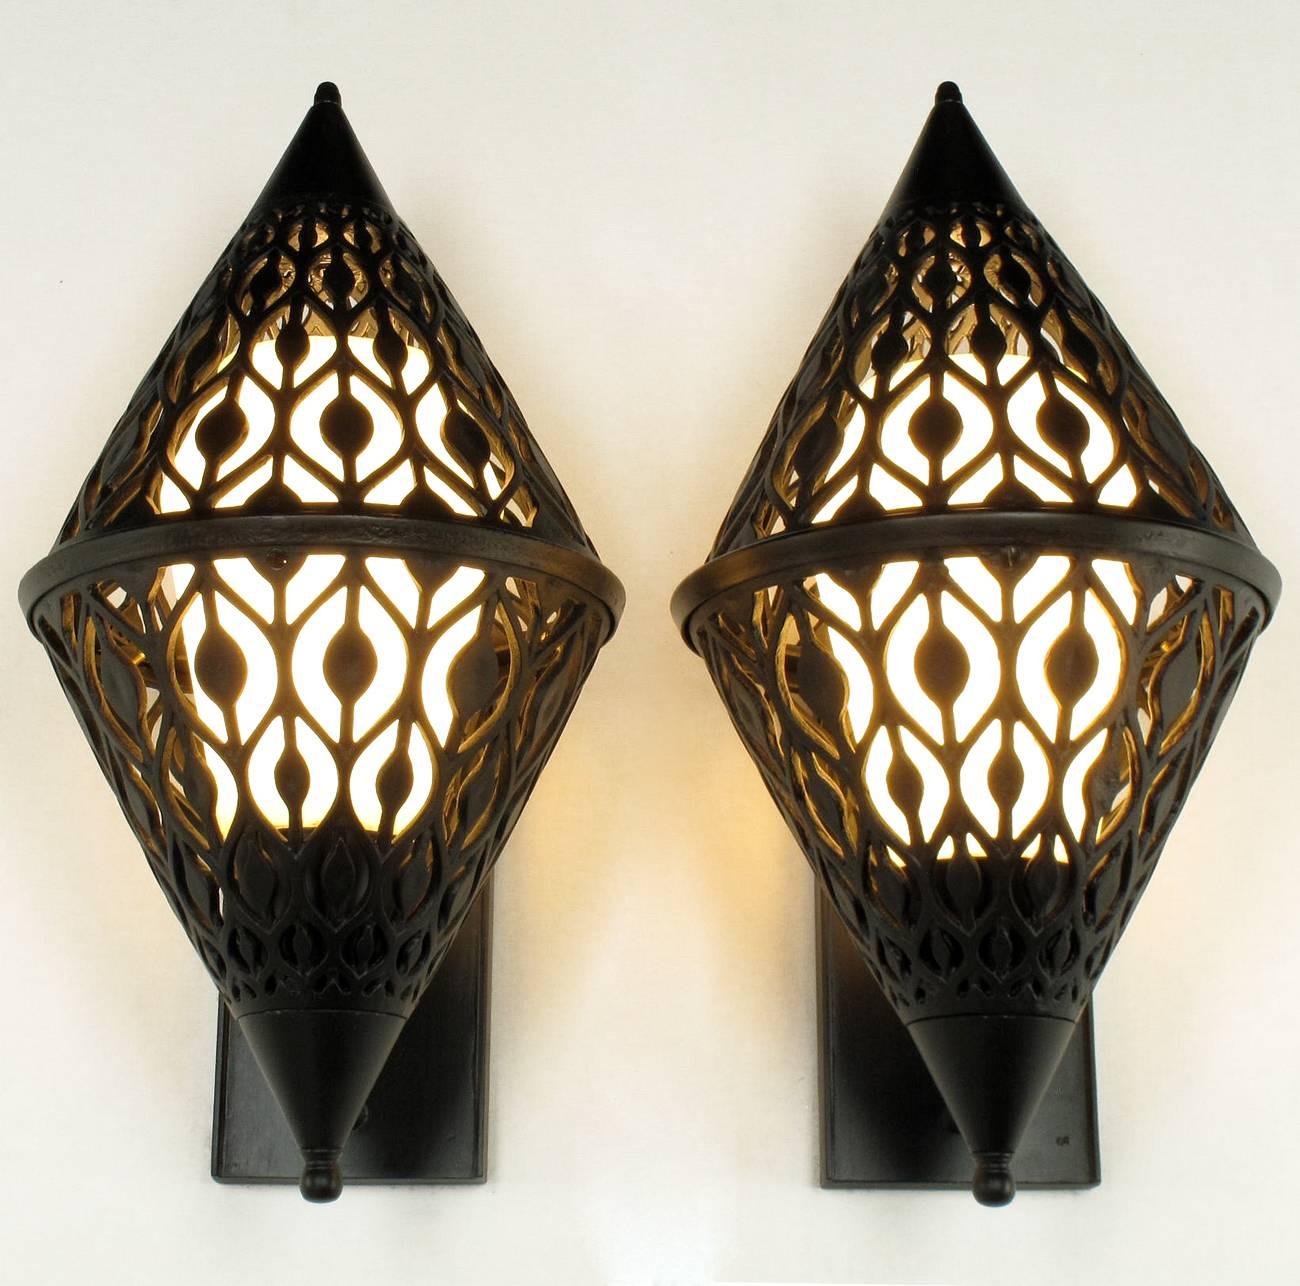 French Pair of Black Enamel Pierced Diamond Sconces with Internal Milk Glass Shades For Sale